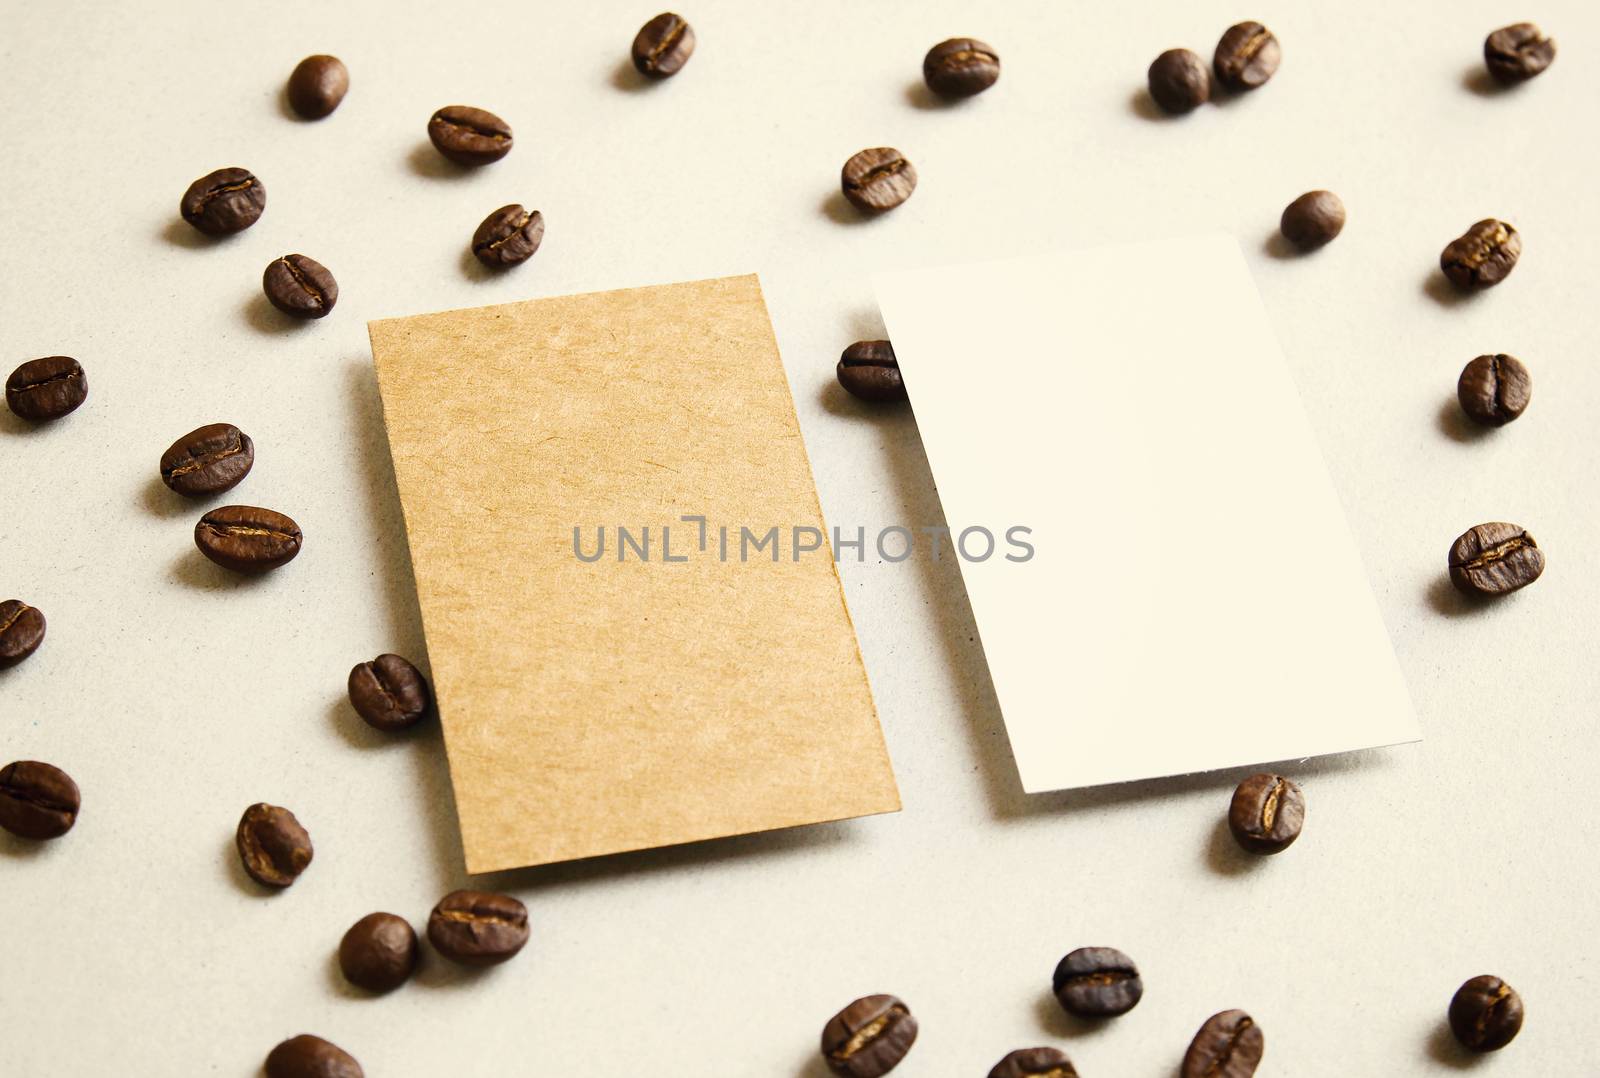 Blank business name card on coffee beans with retro filter effect